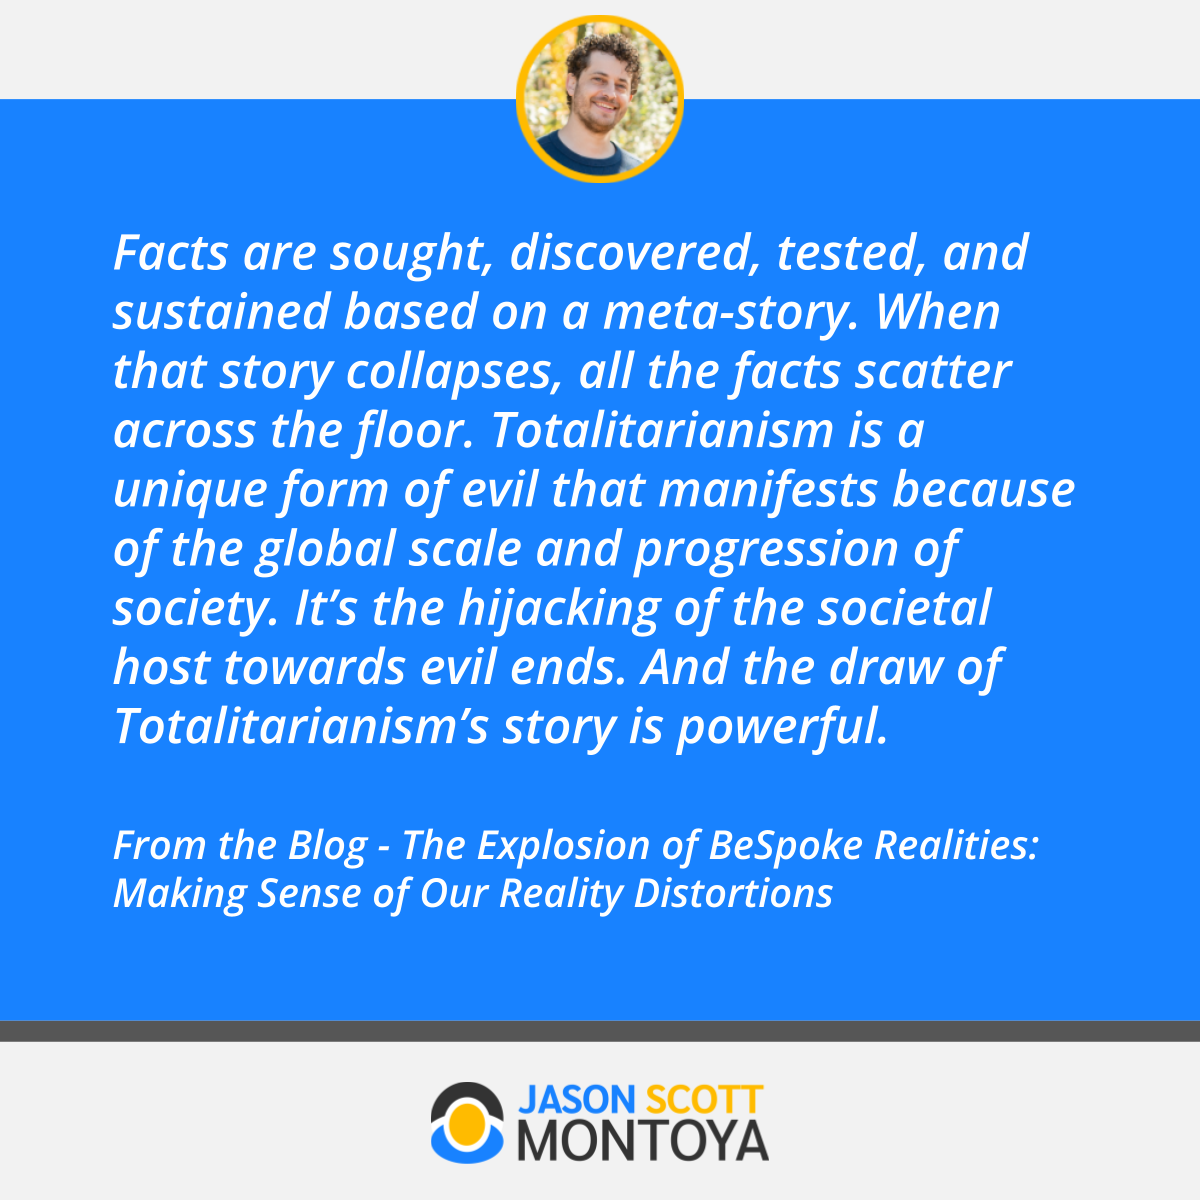 Facts are sought, discovered, tested, and sustained based on a meta-story. When that story collapses, all the facts scatter across the floor. Totalitarianism is a unique form of evil that manifests because of the global scale and progression of society. It’s the hijacking of the societal host towards evil ends. And the draw of Totalitarianism’s story is powerful.  From the Blog - The Explosion of BeSpoke Realities: Making Sense of Our Reality Distortions